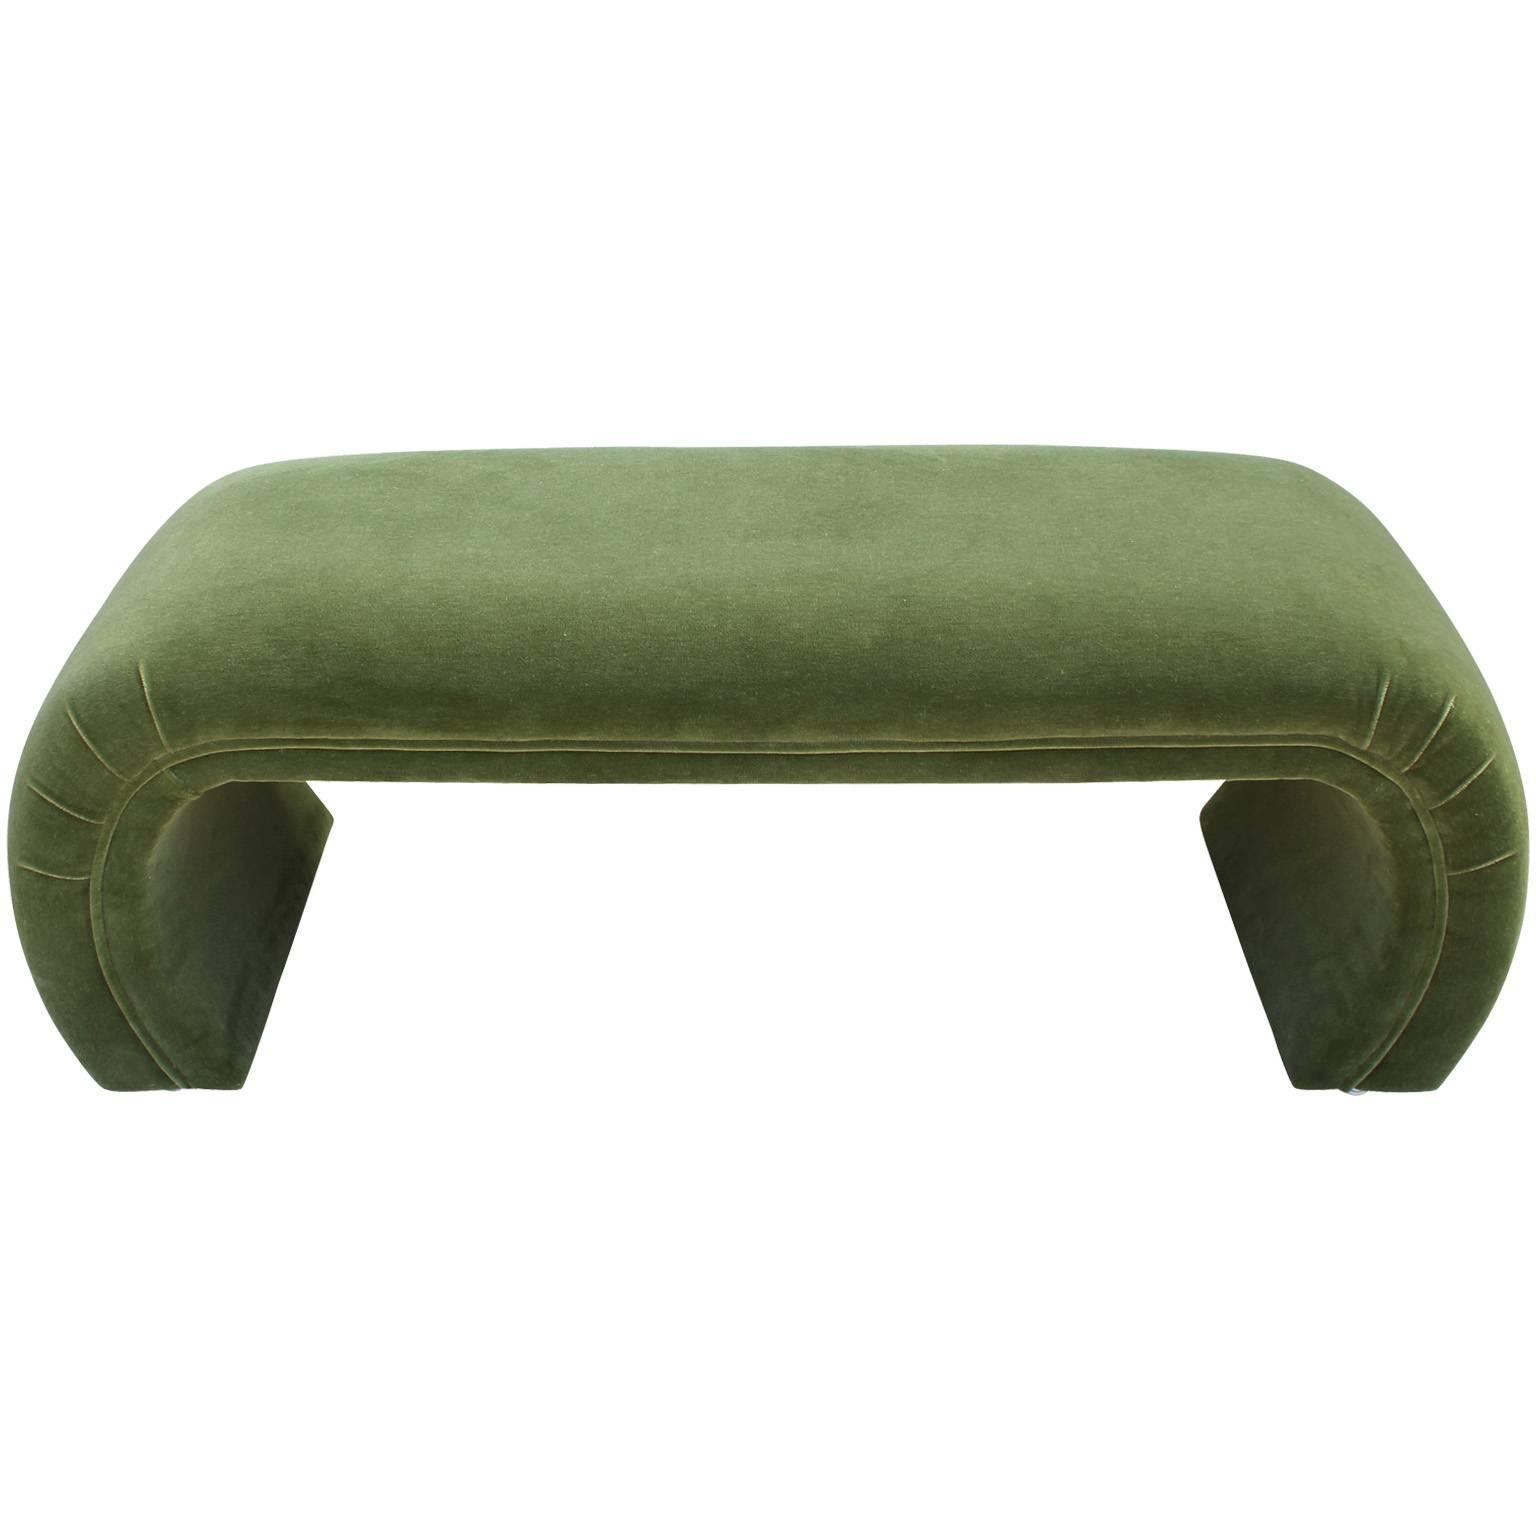 Wonderful scroll shaped bench in the style of Milo Baughman or Karl Springer. Waterfall style bench has elegant curved lines and the perfect amount of detail. Freshly upholstered in a moss green mohair velvet. Perfect at the end of a bed.